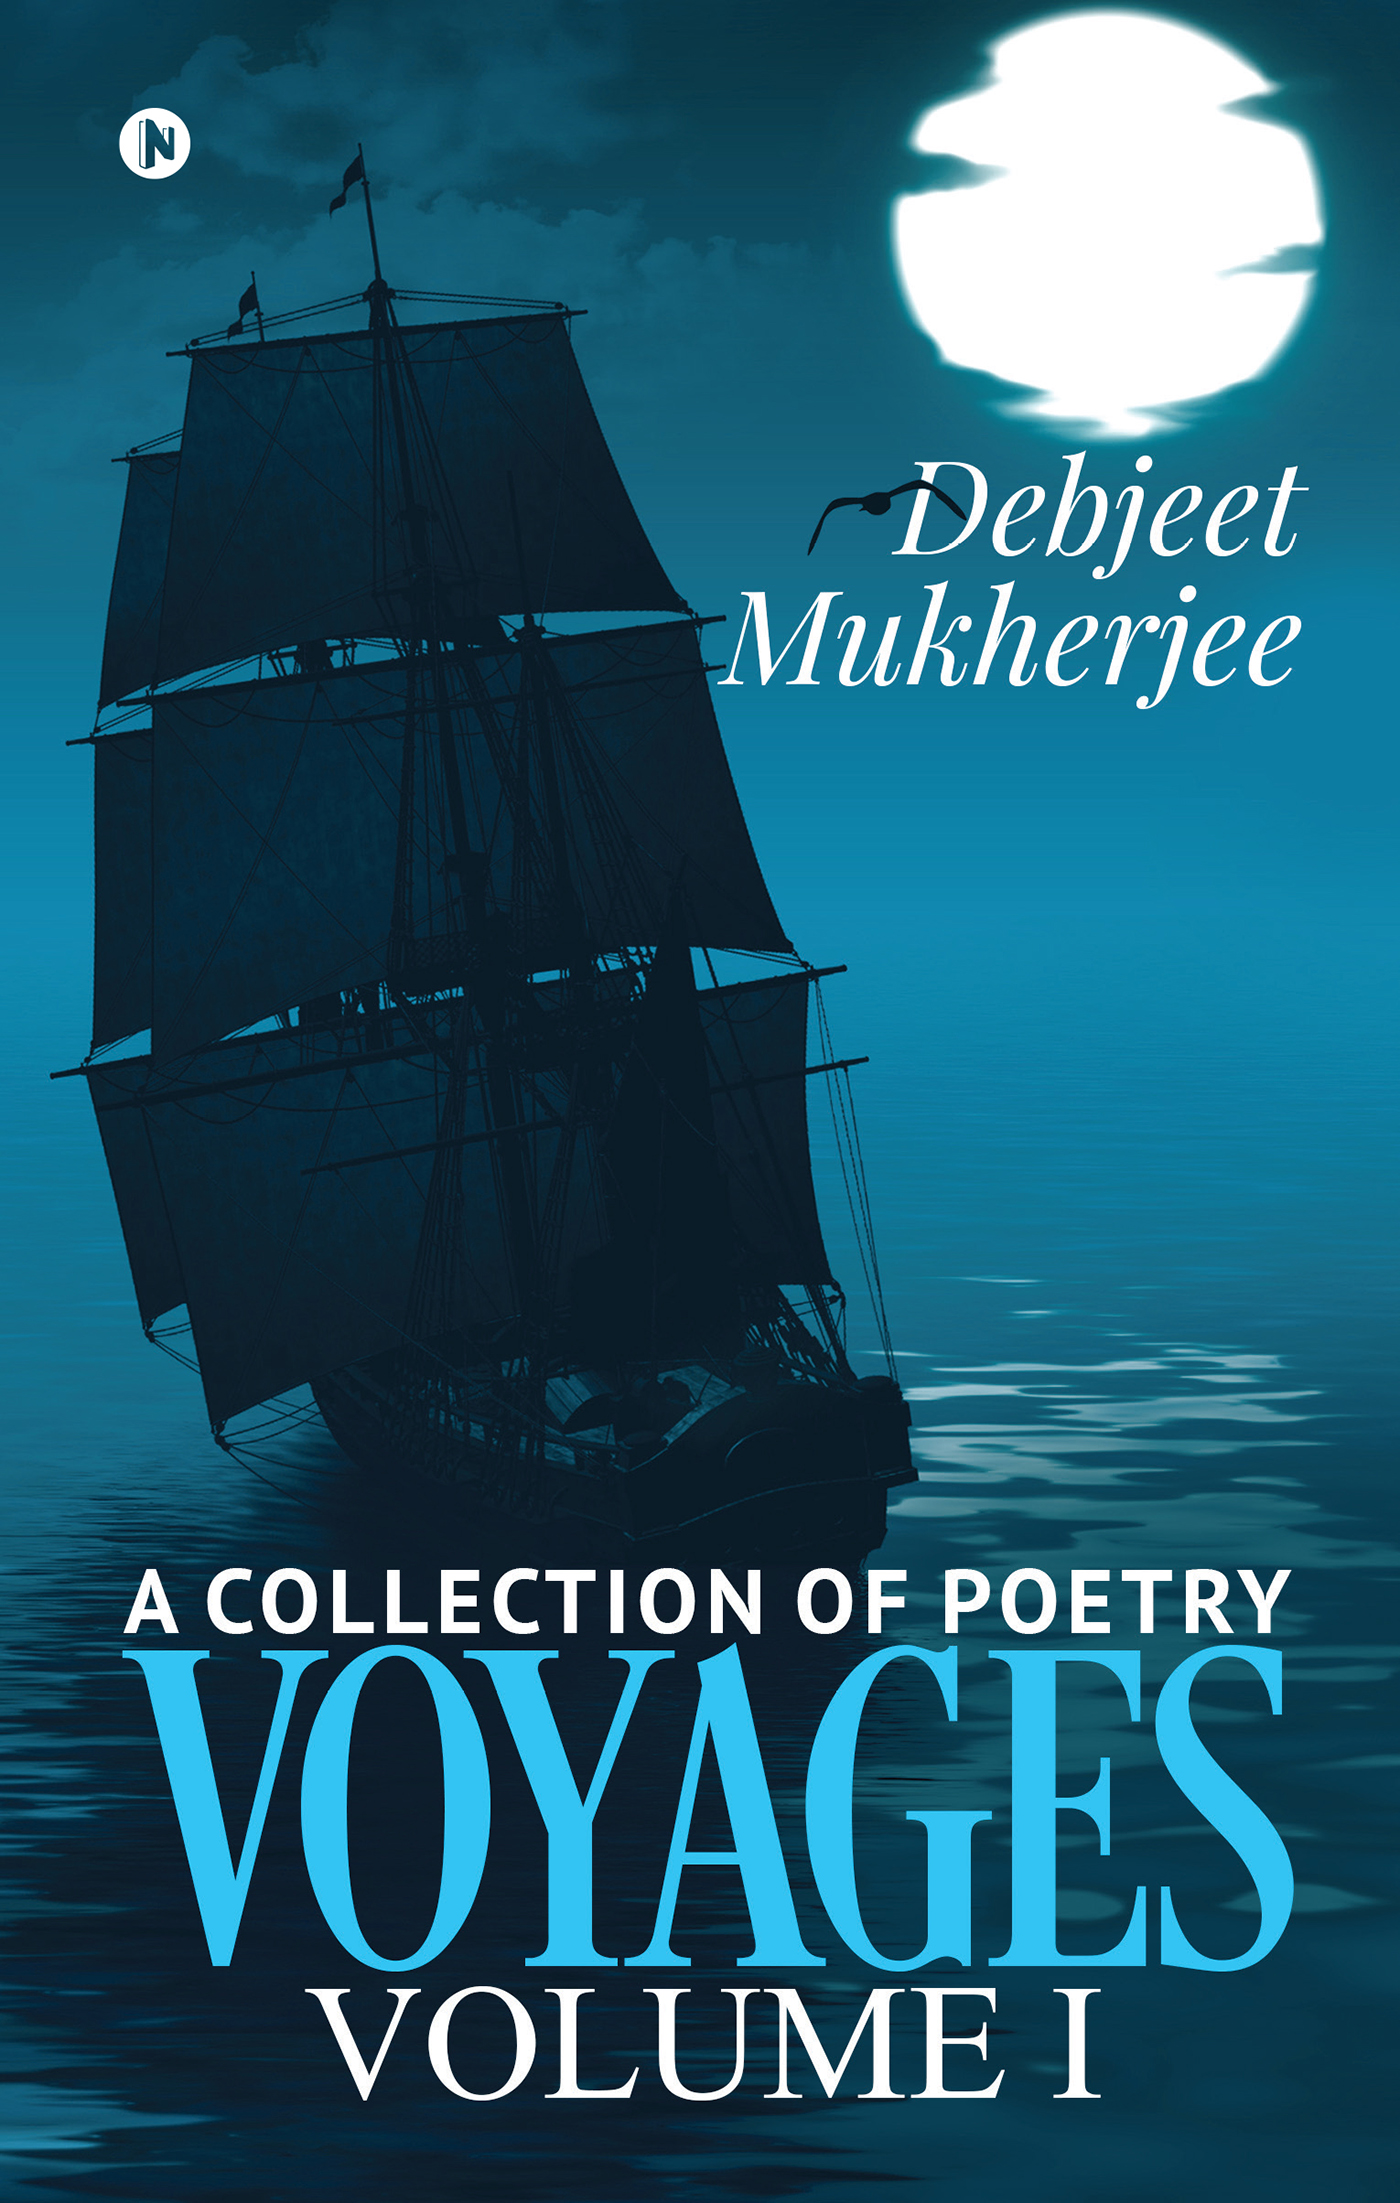 FREE: VOYAGES Volume I – A Collection of Poetry by Debjeet Mukherjee